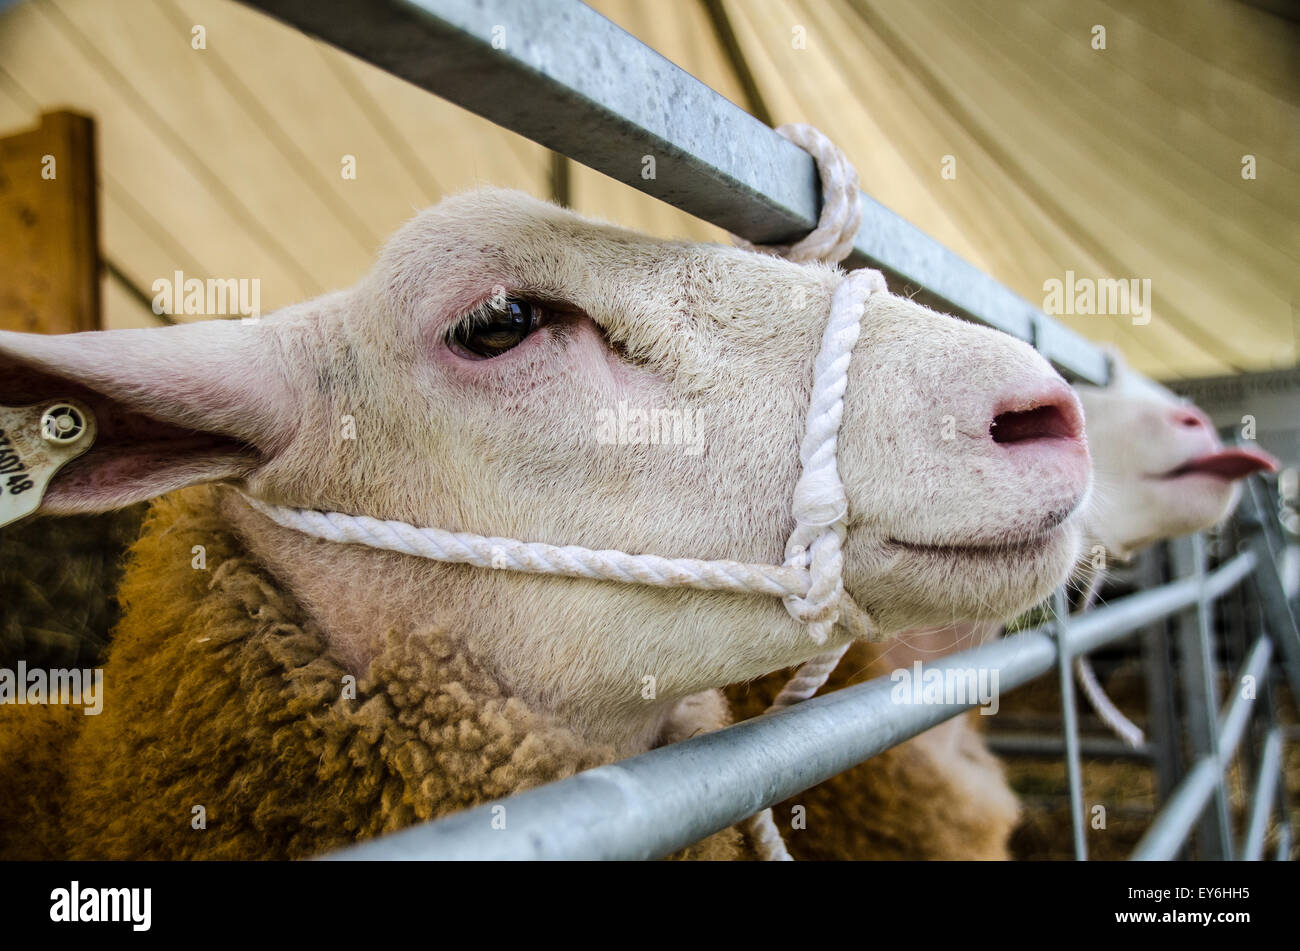 Sheep in pen at agricultural show awaiting judging. One sheep sticking it's tongue out! Stock Photo